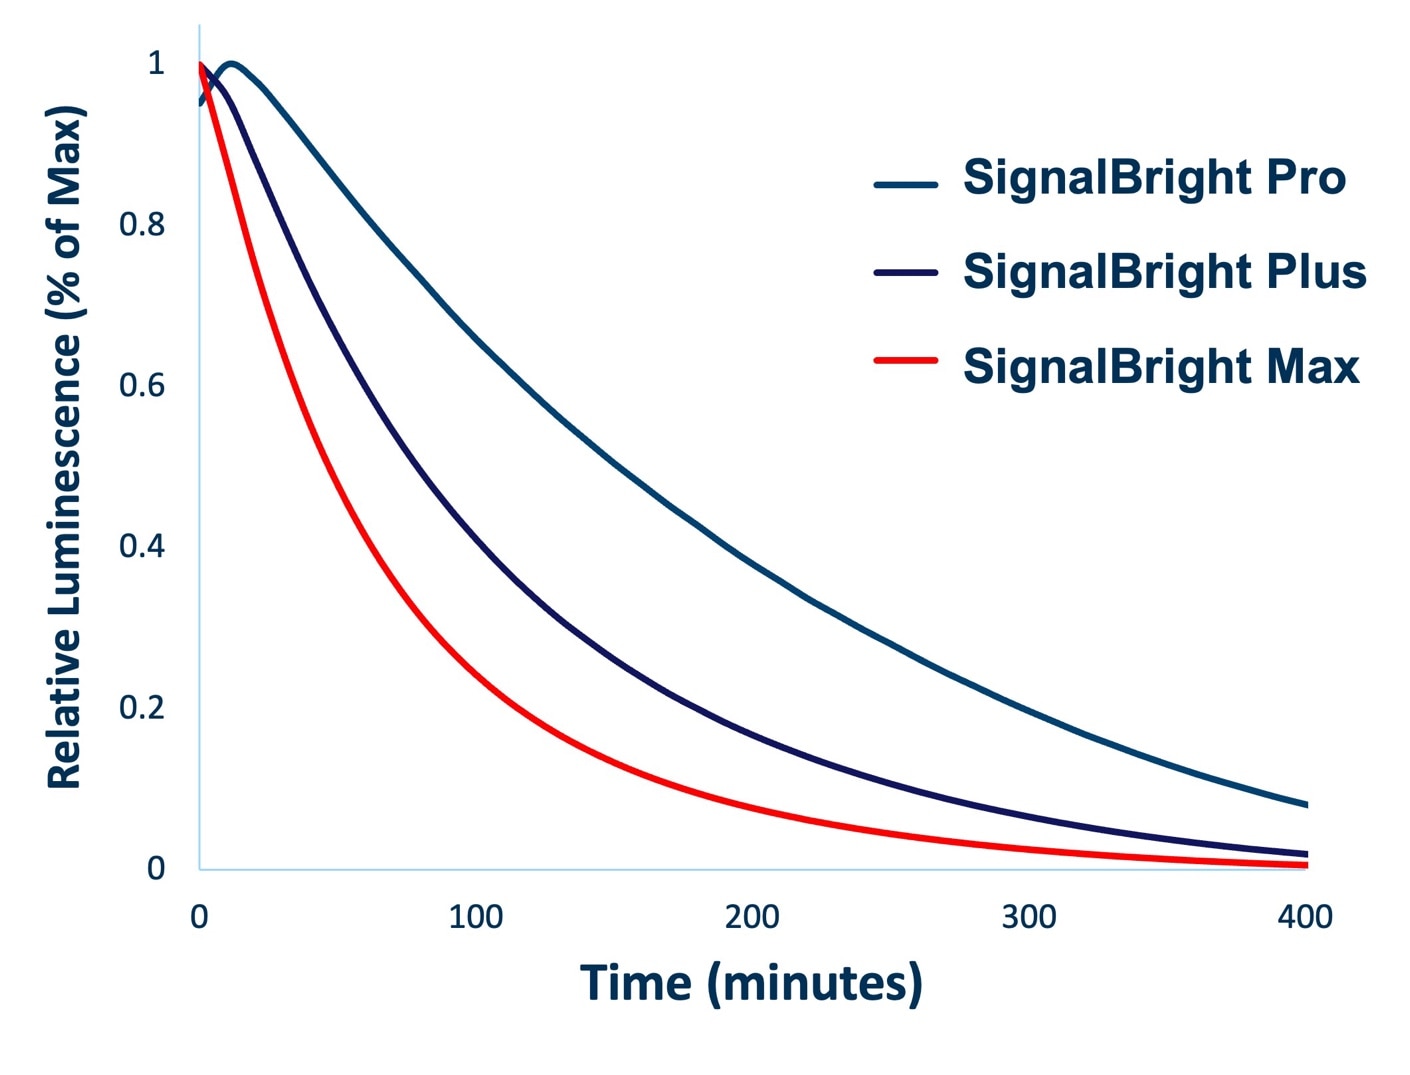 Proteintech's SignalBright enhanced chemiluminescent (ECL) substrate signal duration graph shows over 5 hours of bright signal